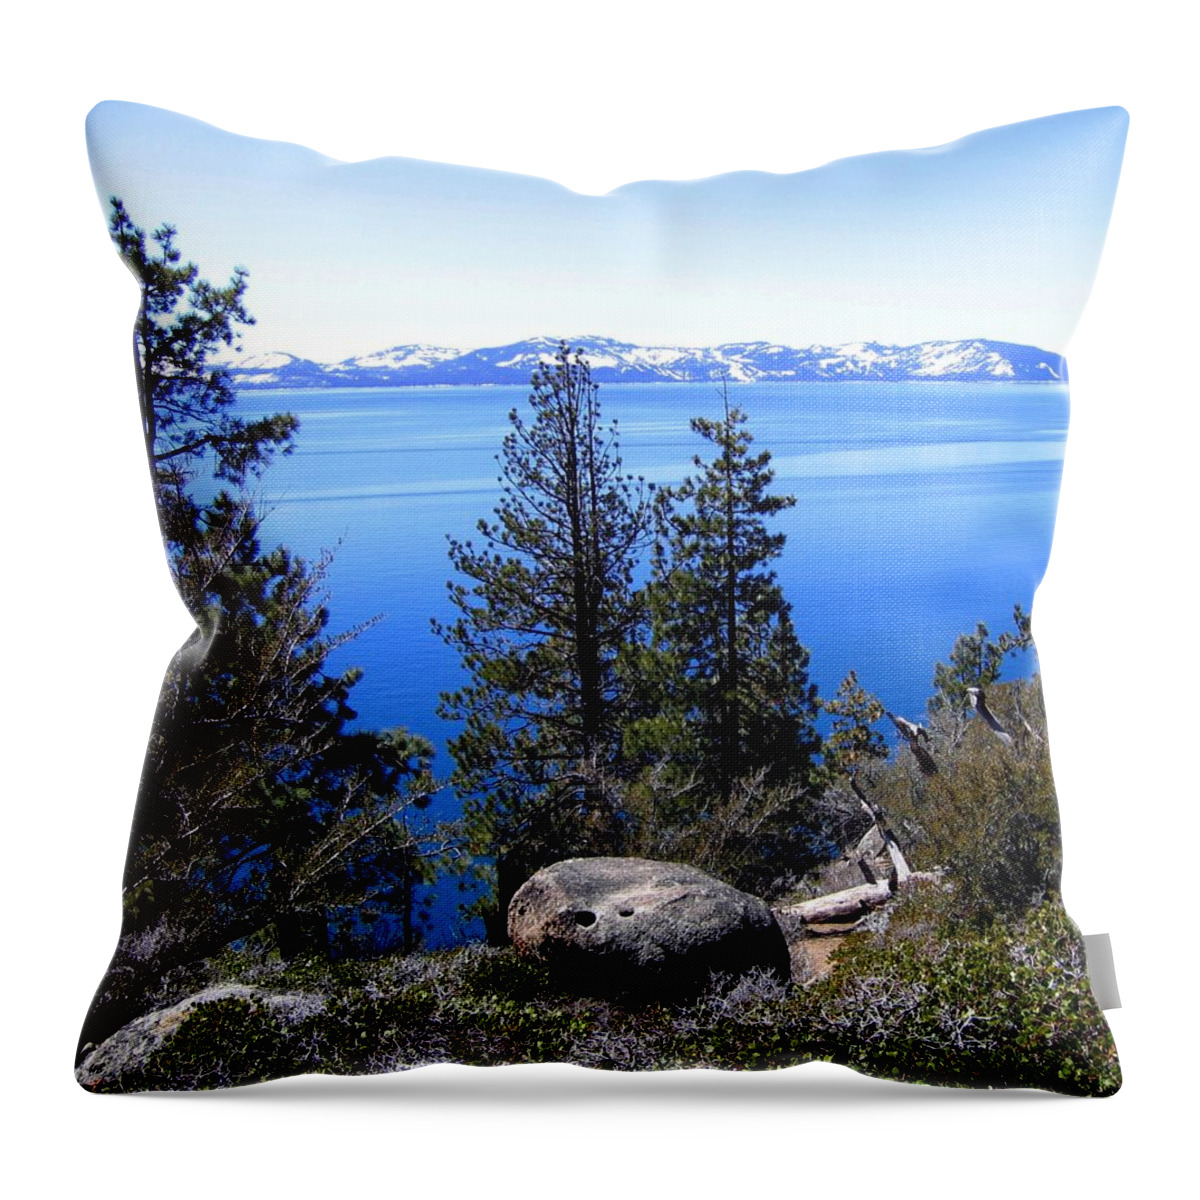 Lake Tahoe Throw Pillow featuring the photograph Tranquil Lake Tahoe by Will Borden